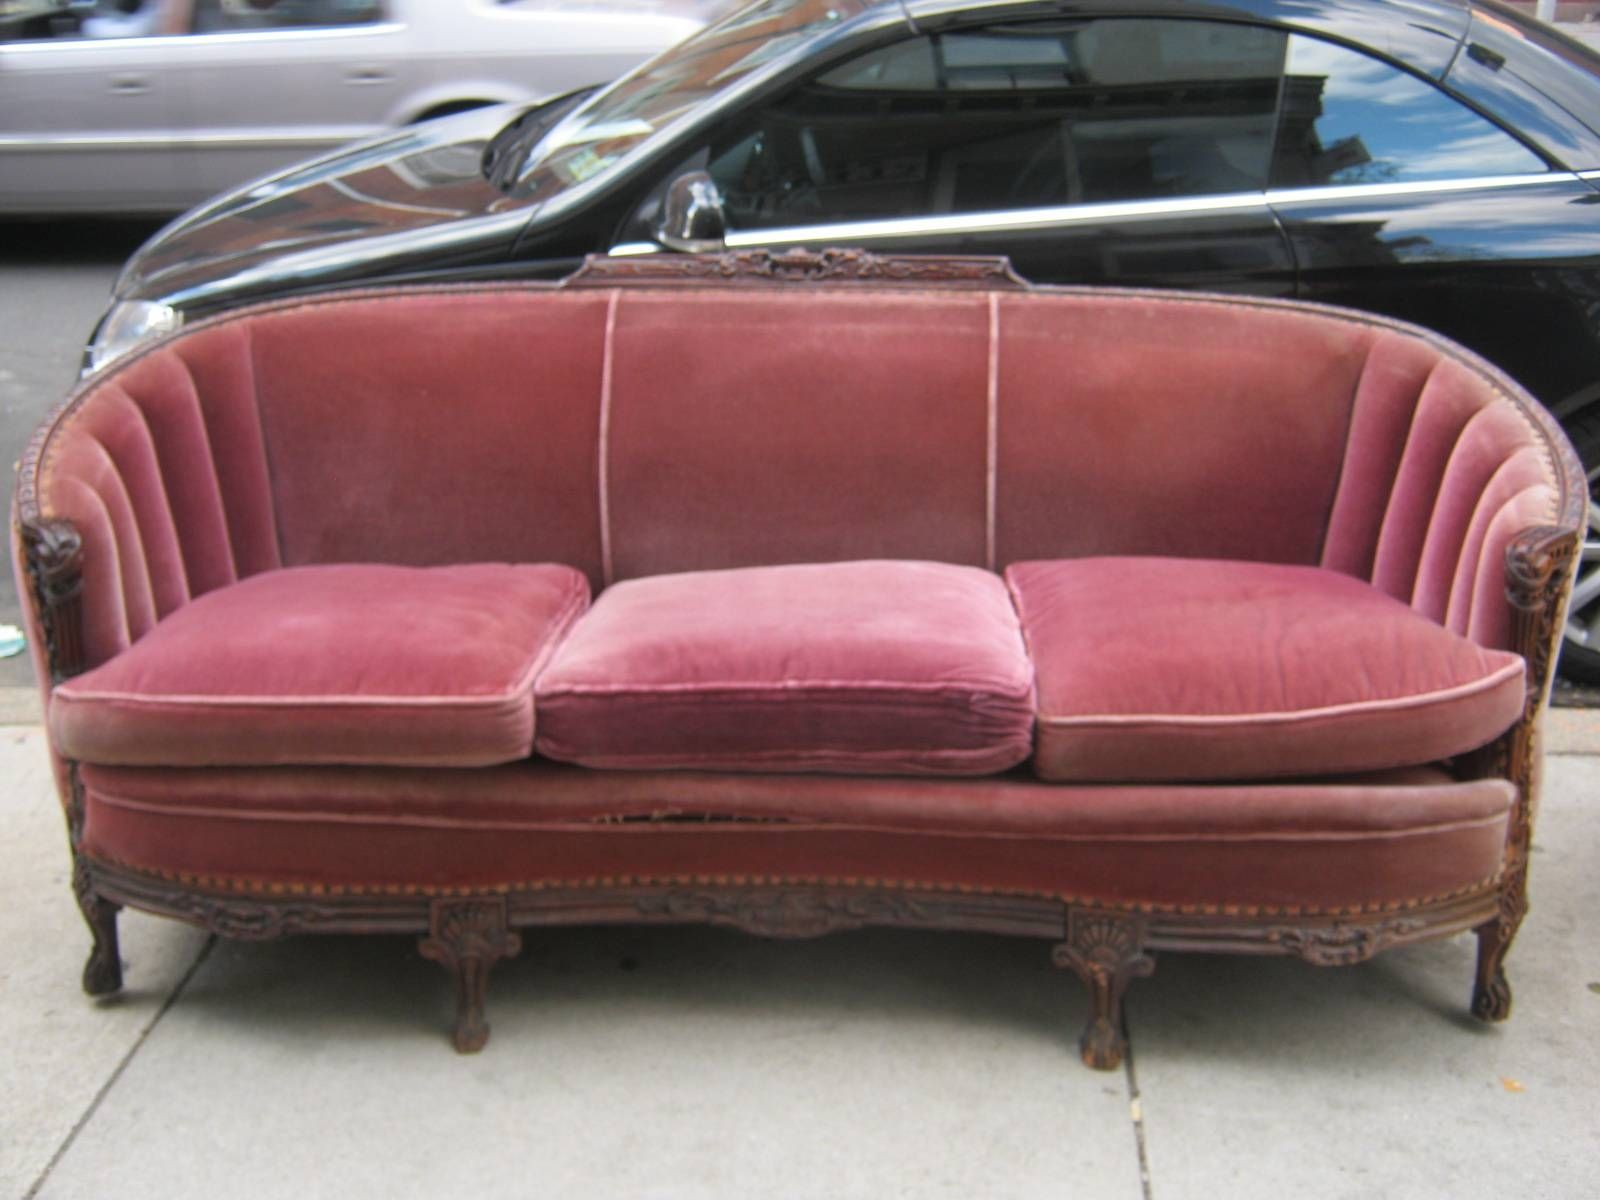 Uhuru Furniture & Collectibles: Victorian Sofa Sold Pertaining To 1930s Couch (View 16 of 30)